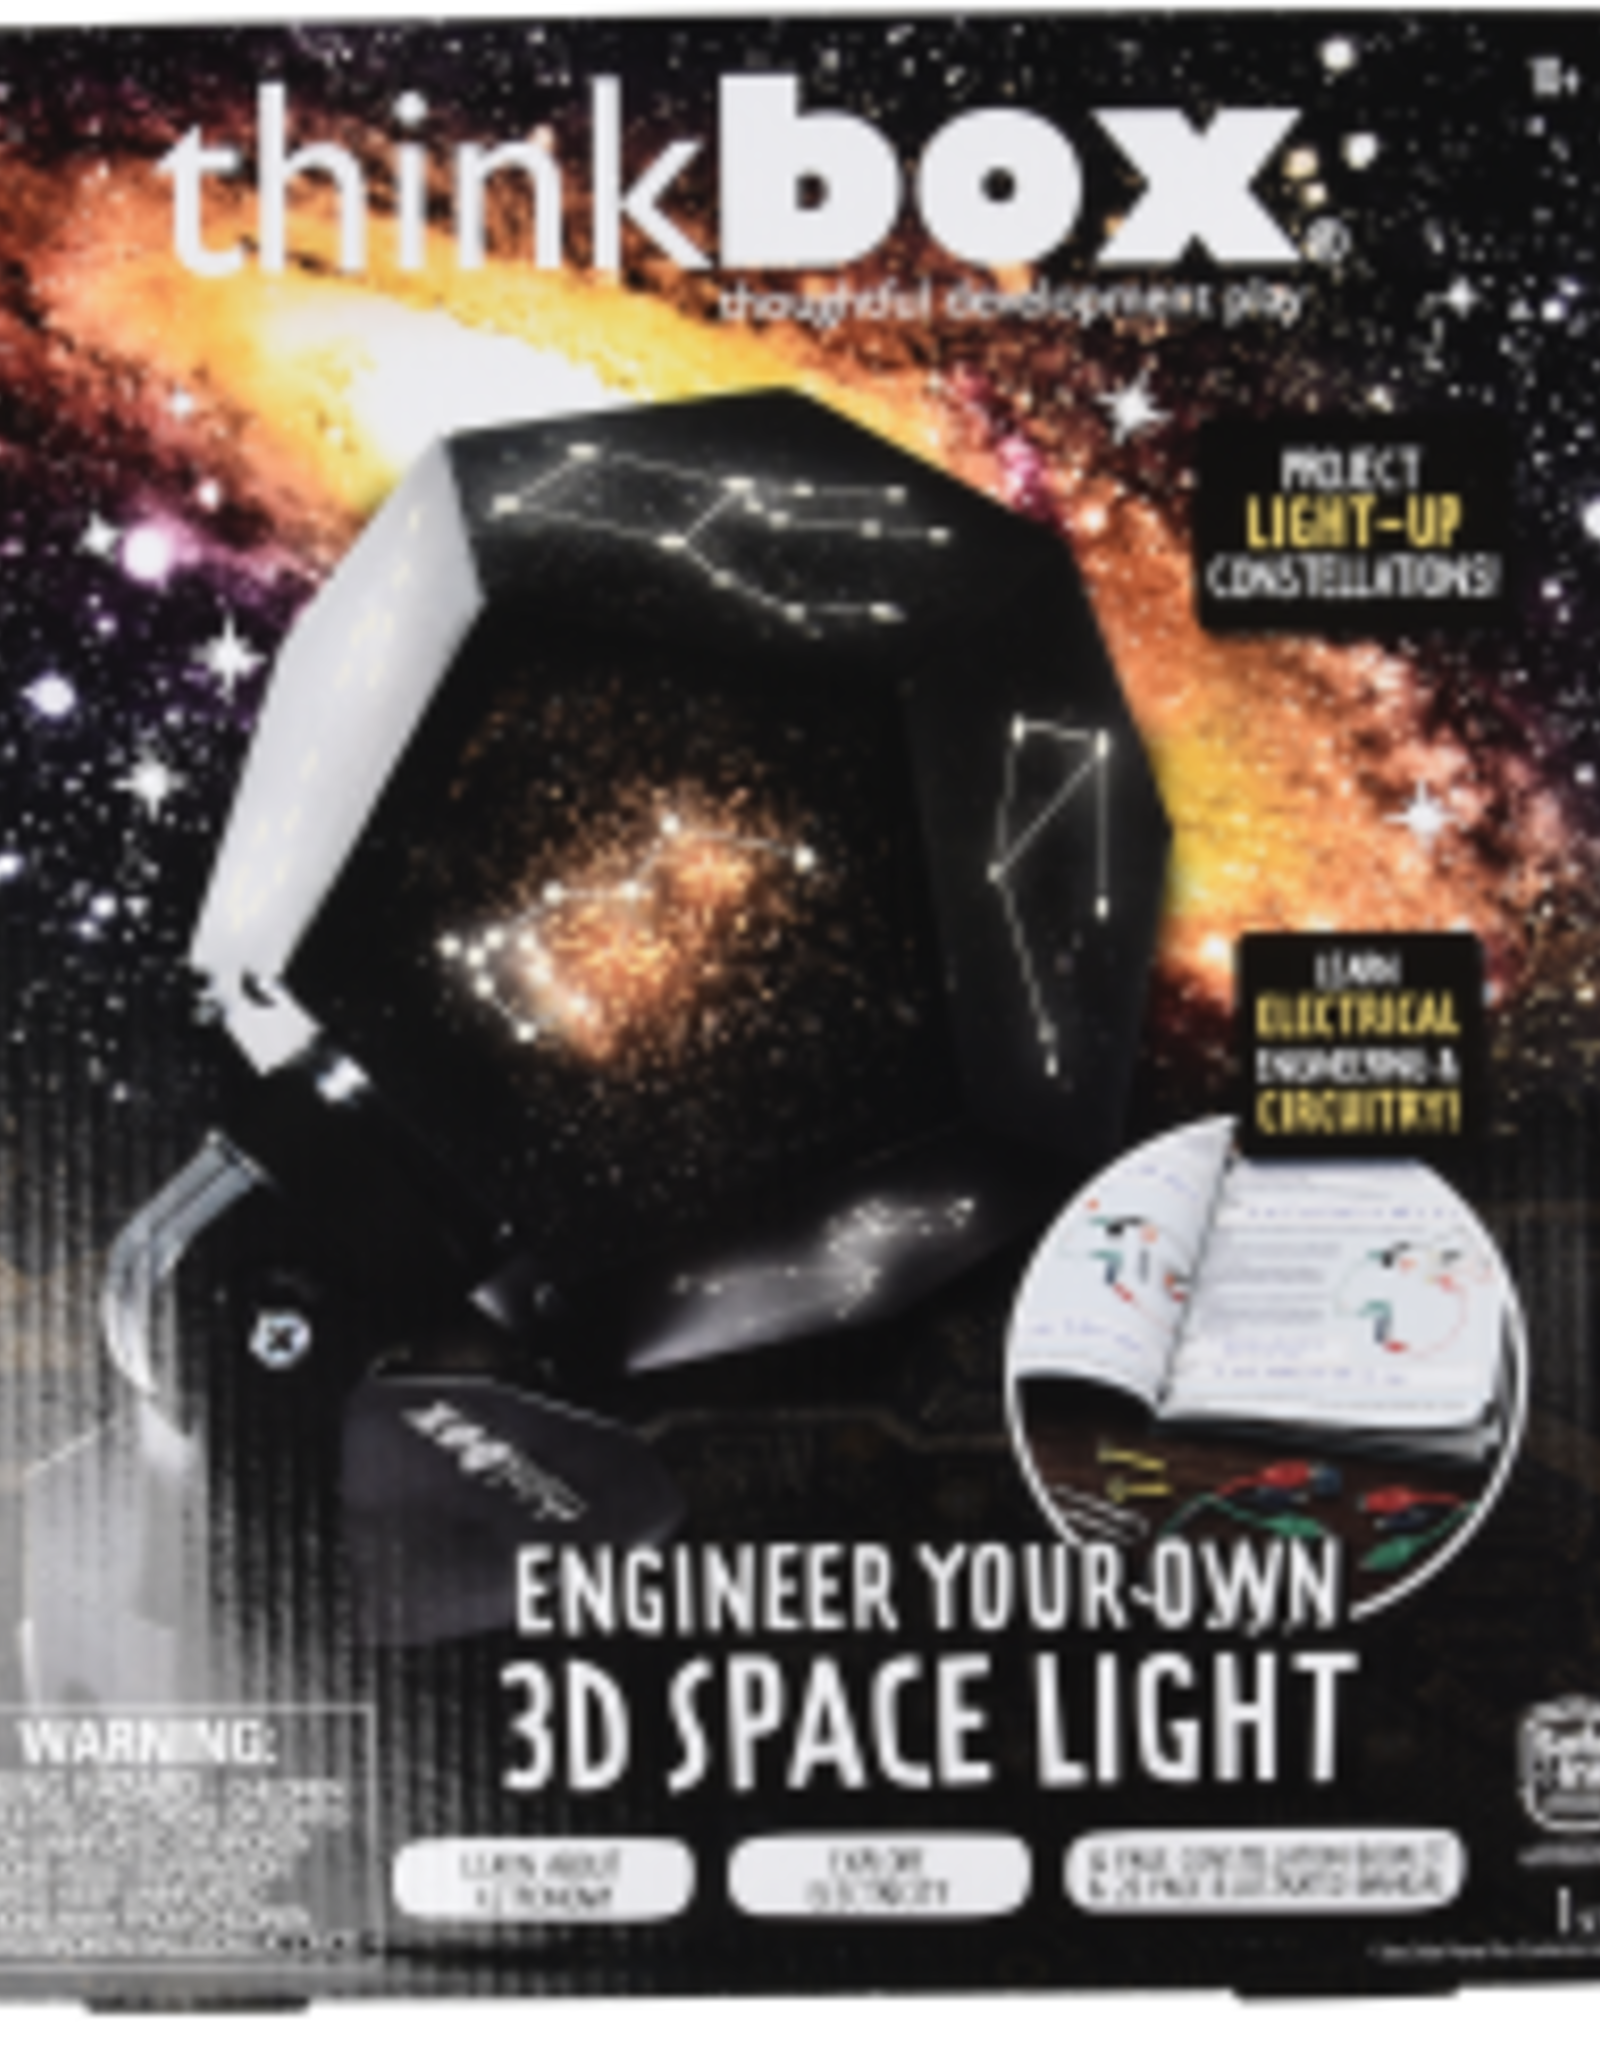 US TOY COMPANY SPACE LIGHT 3D